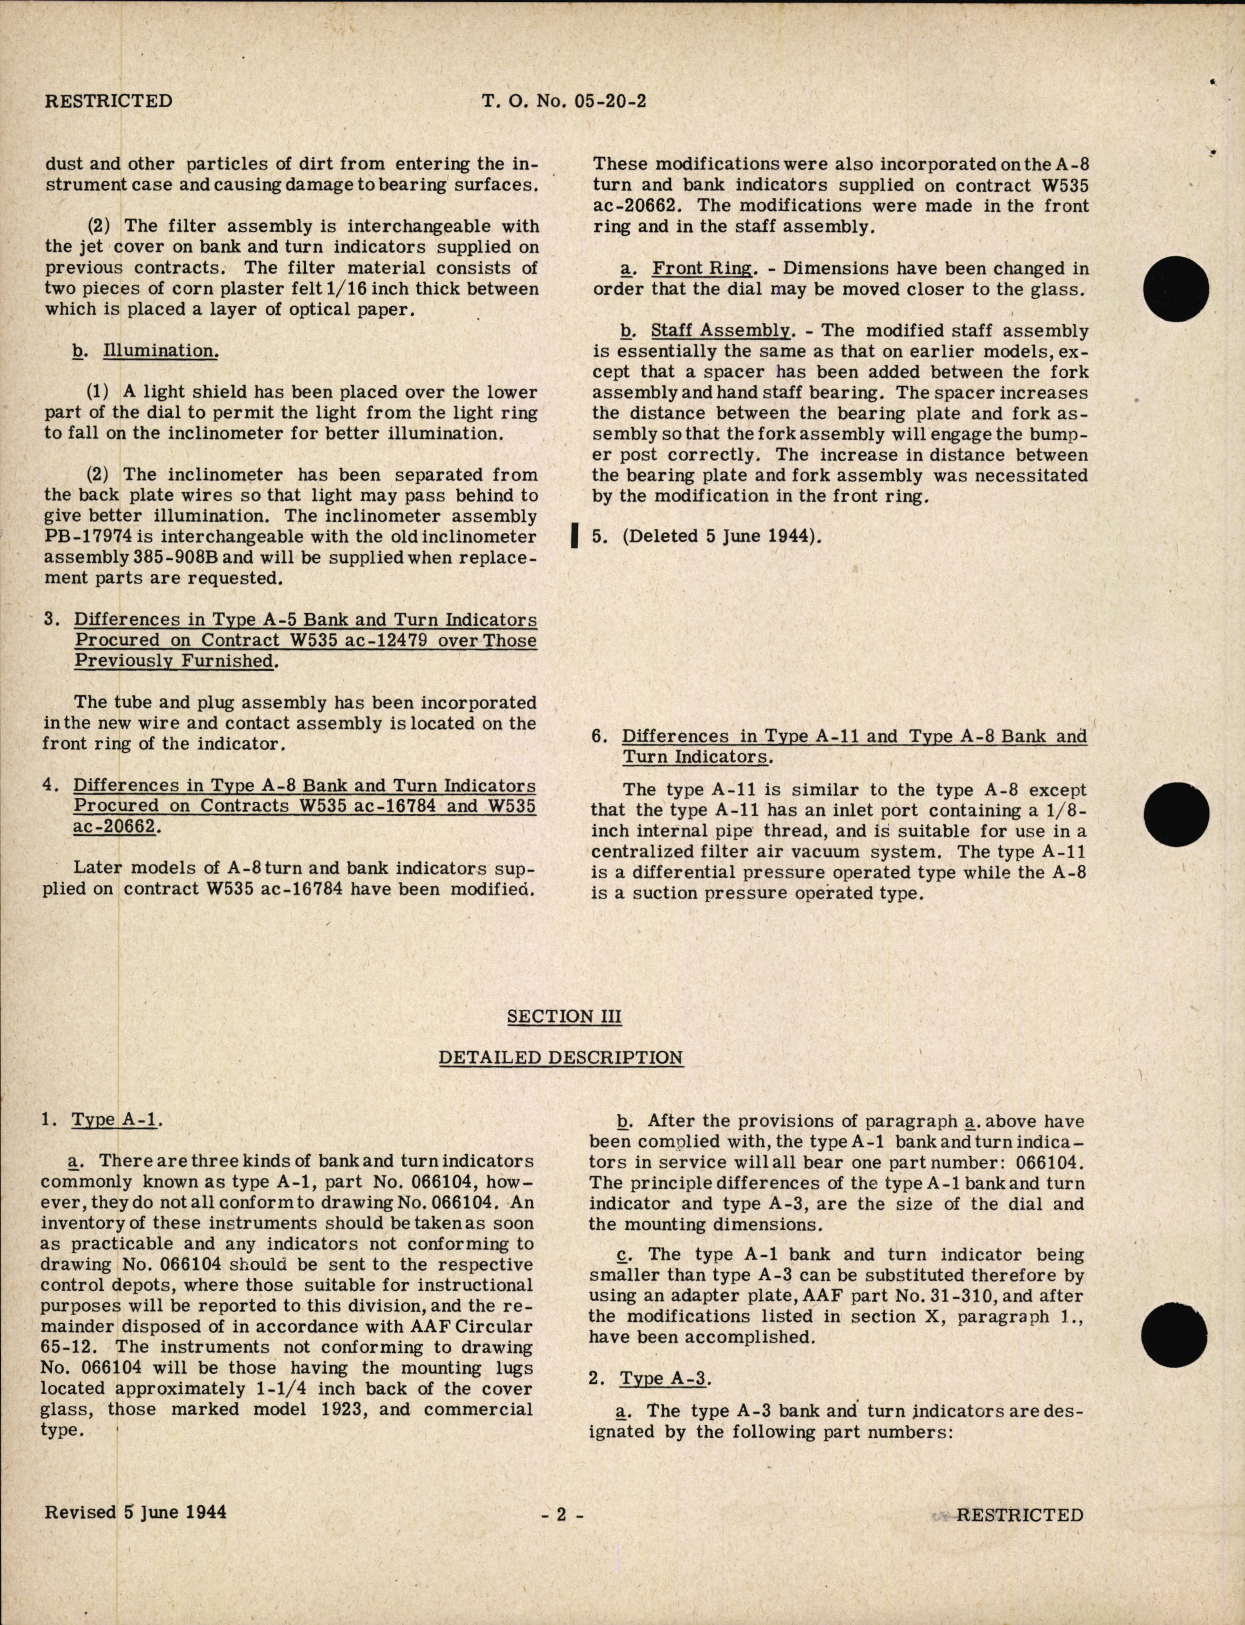 Sample page 8 from AirCorps Library document: Handbook of Instructions with Parts Catalog for Bank and Turn Indicators